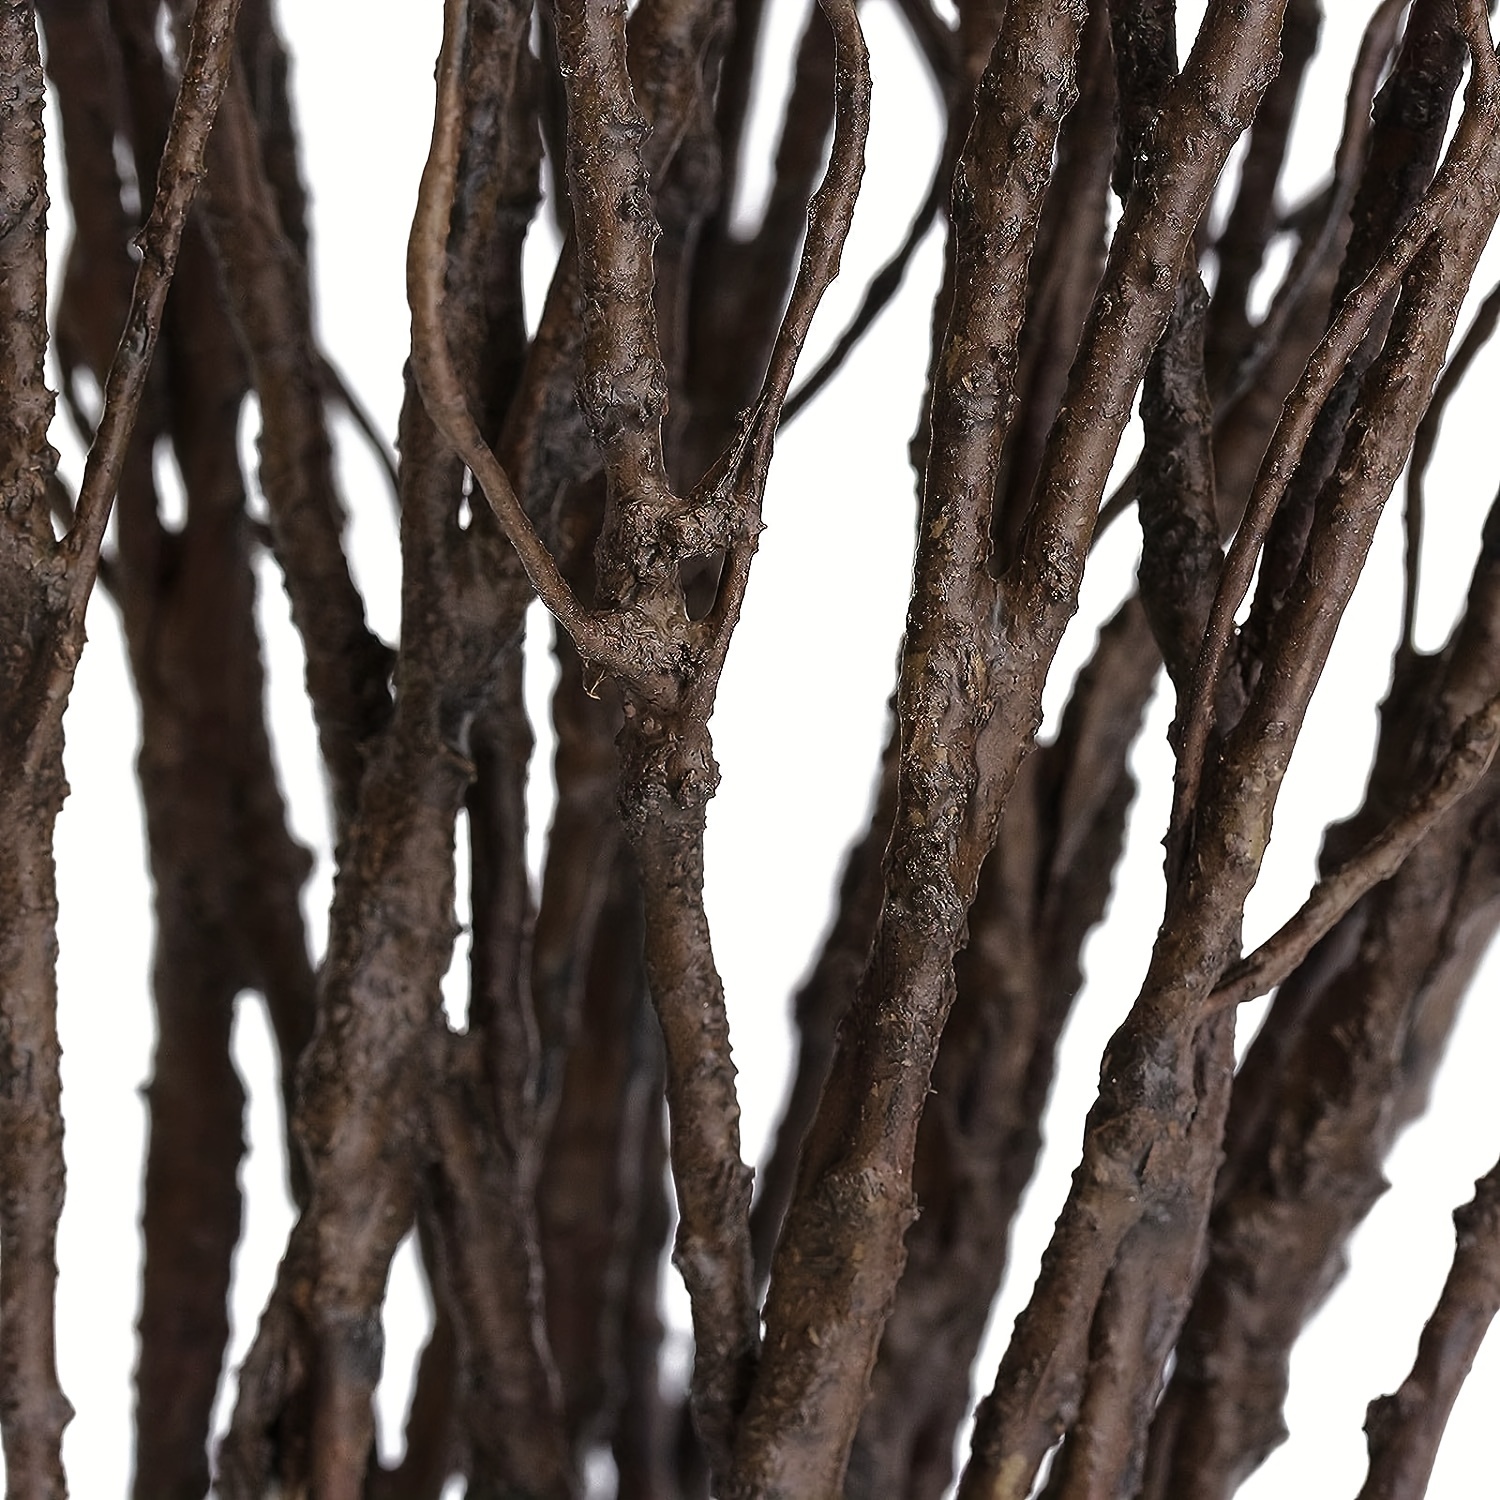 FeiLix 5PCS Artificial Curly Willow Branches Decorative Dry Twigs